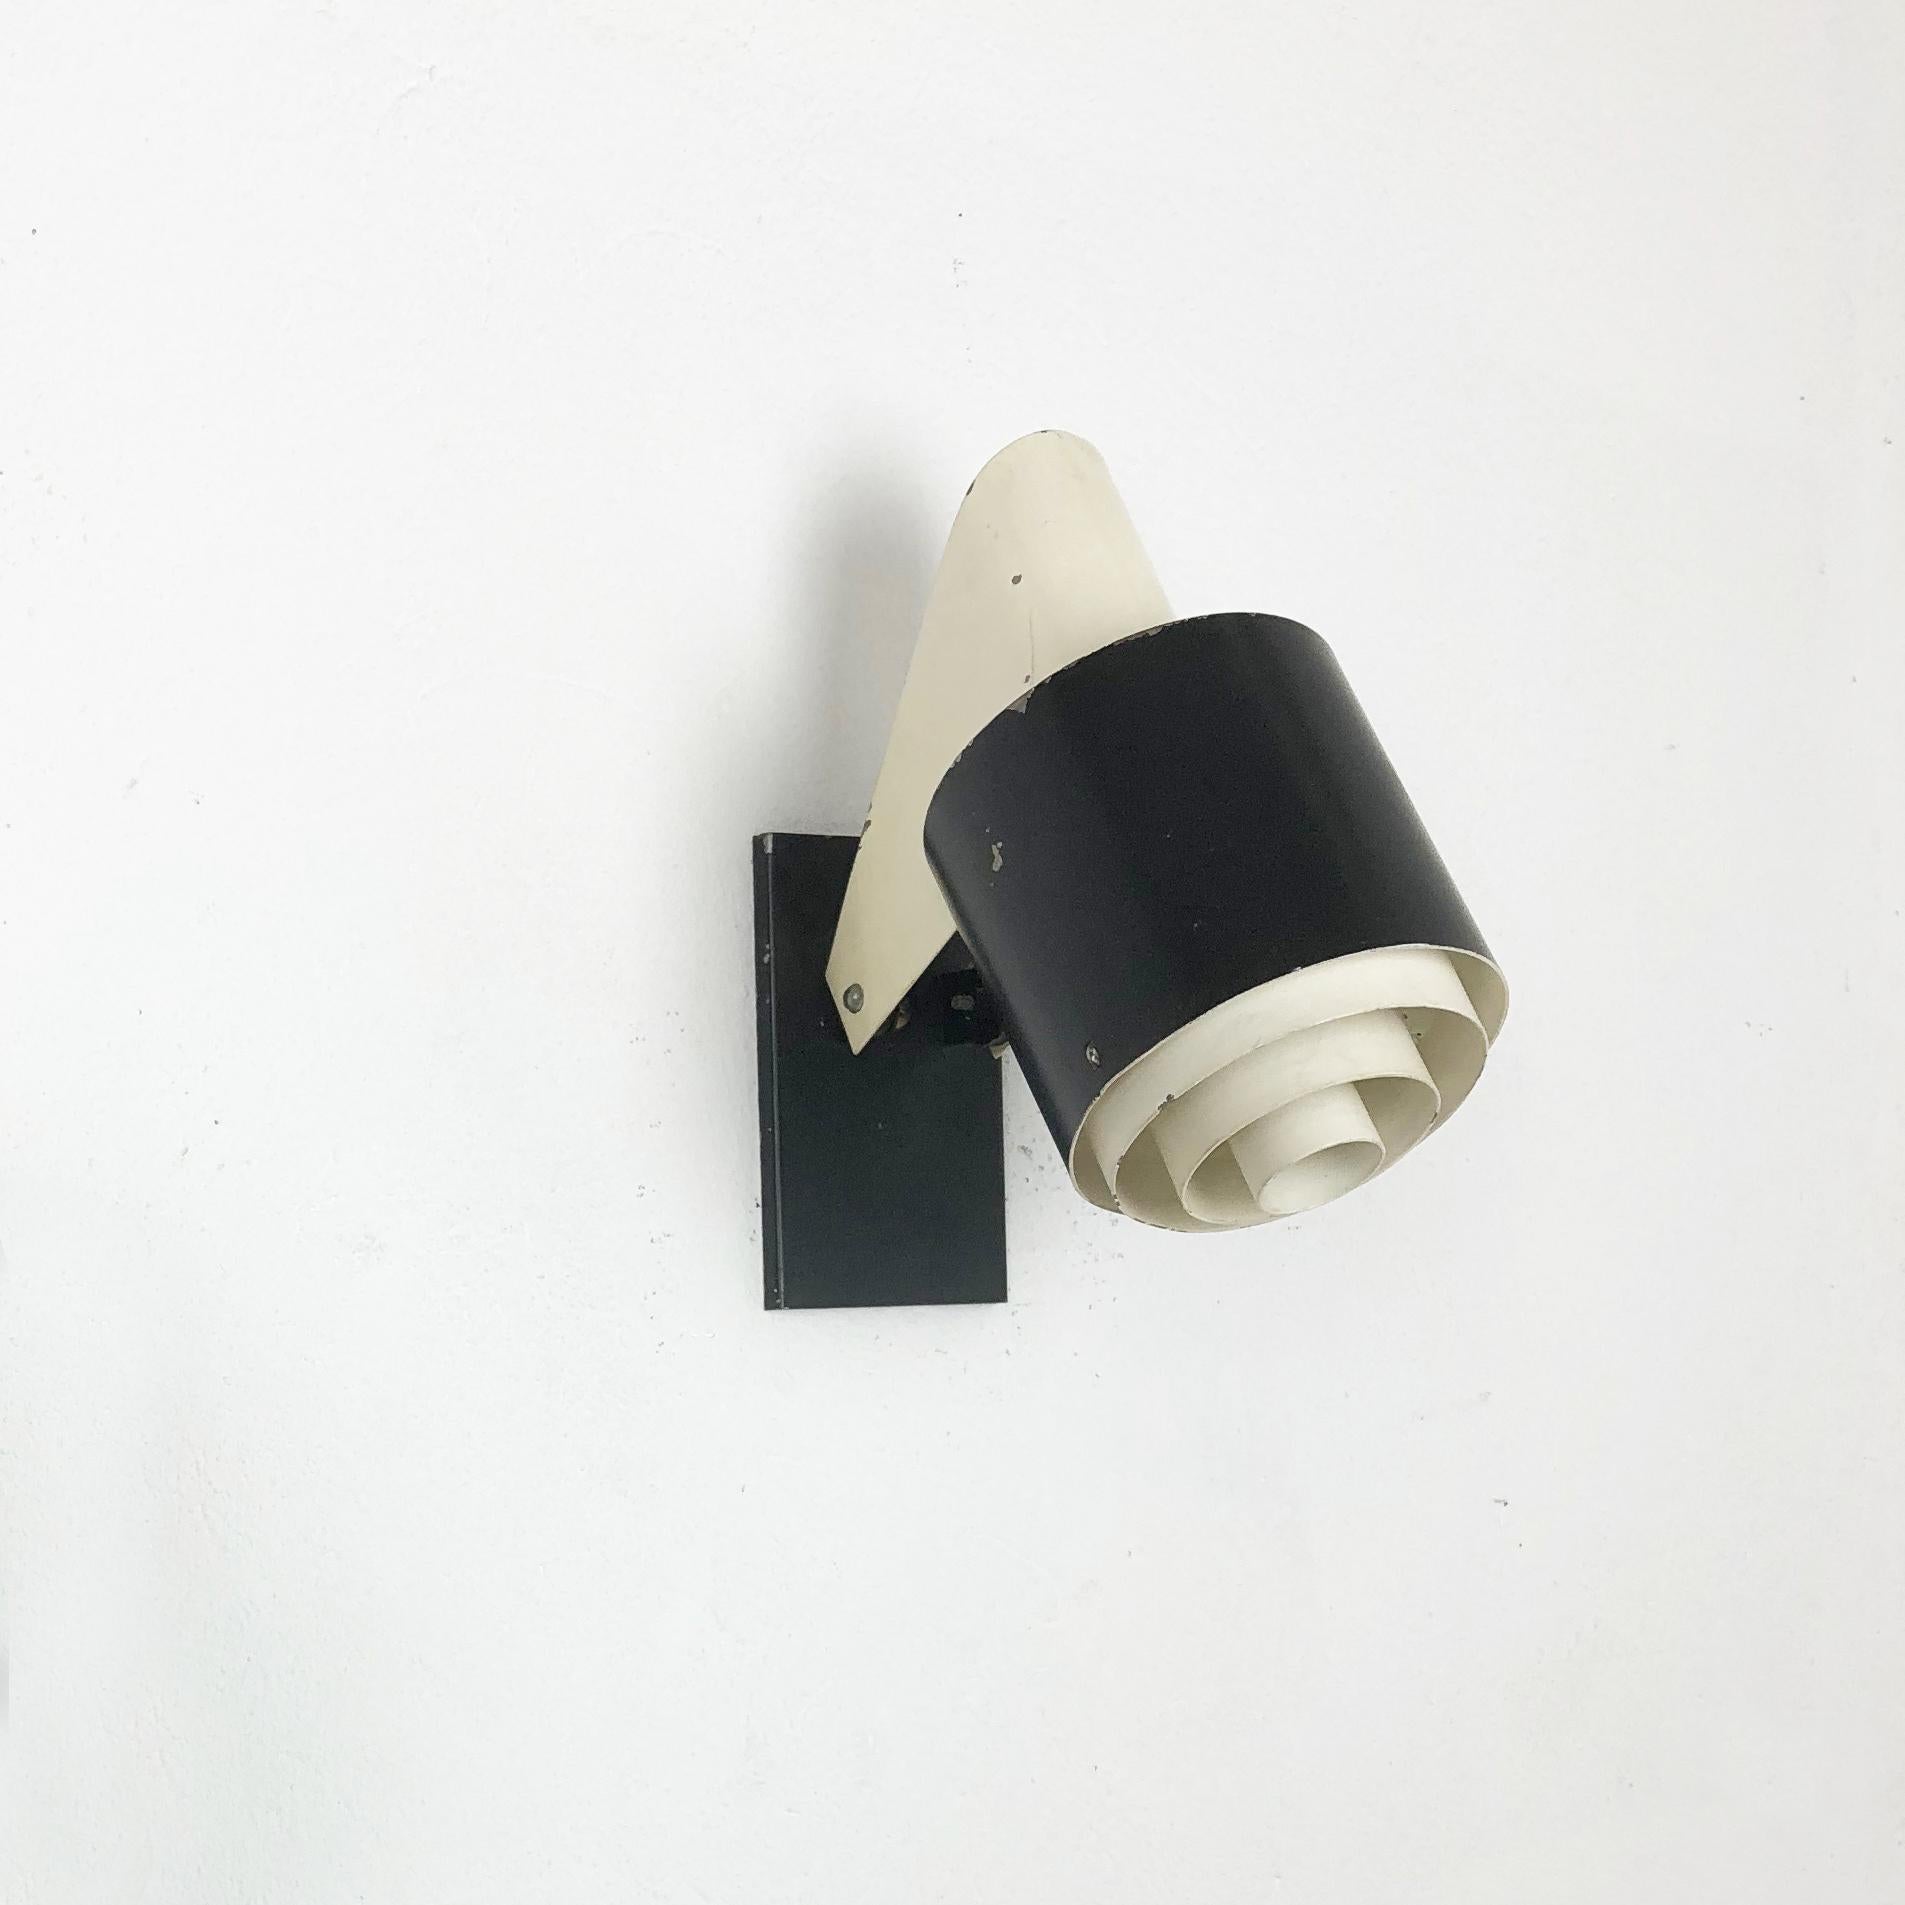 Article:

Wall light sconces small


Producer: 

Novalux, France



Origin:

France



Age:

1960s.






Original 1960s modernist wall light made by Novalux in France. The wall light is made of solid metal in original